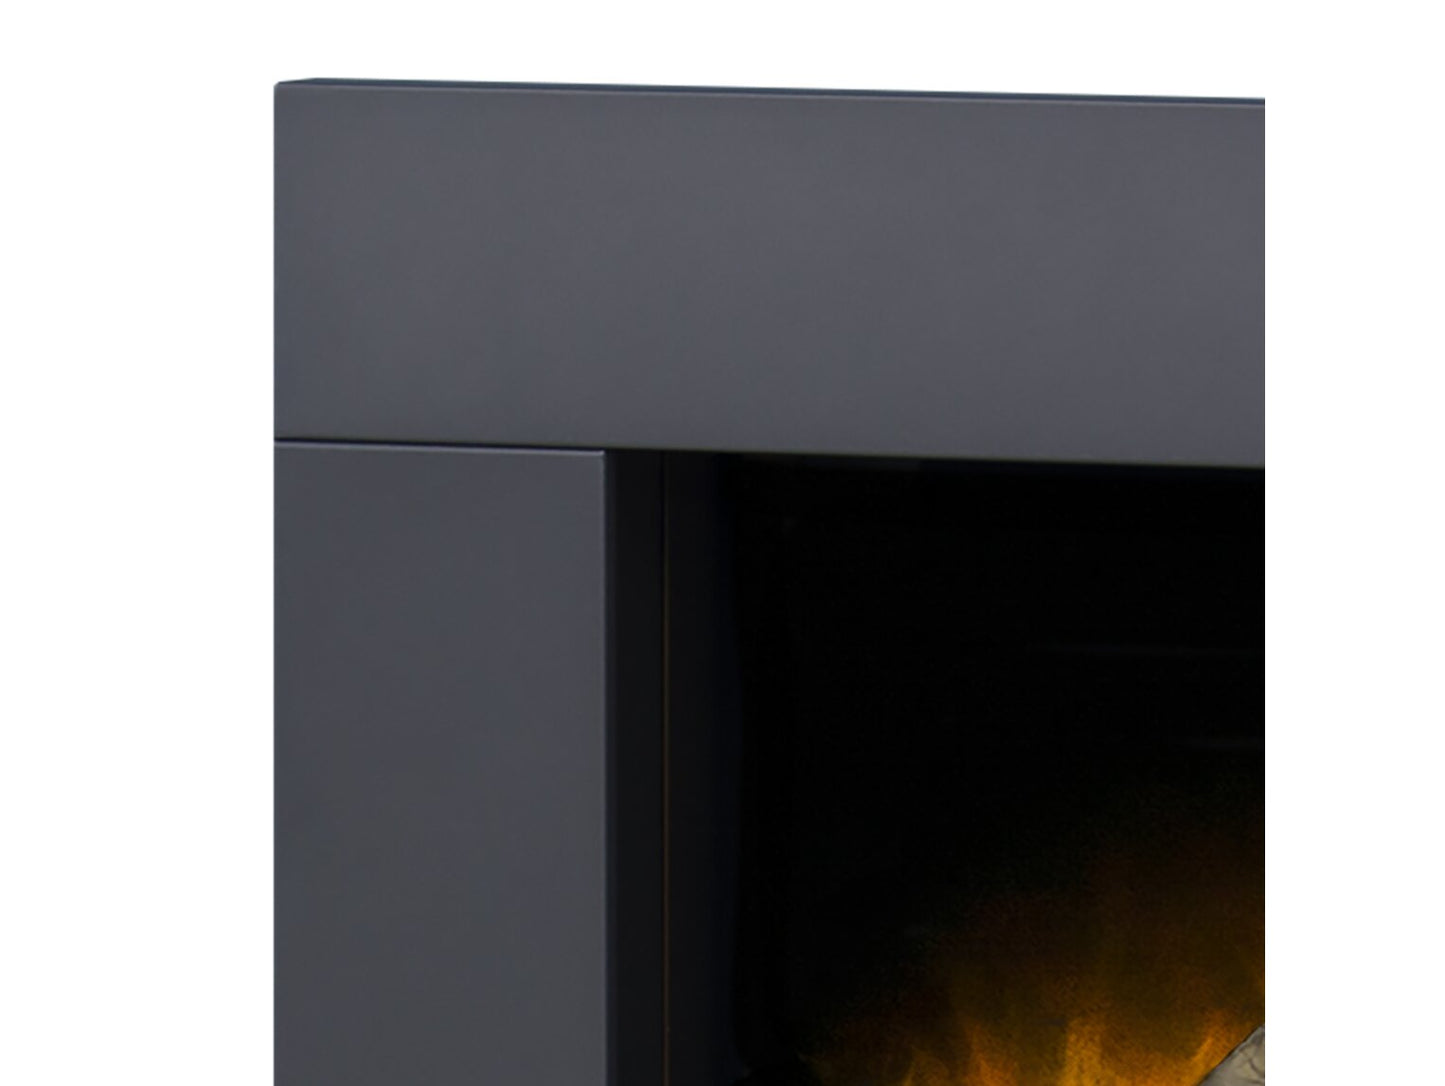 Adam Carina Electric Wall Mounted Fire with Pebbles & Remote Control in 32 Inch 23621 Black